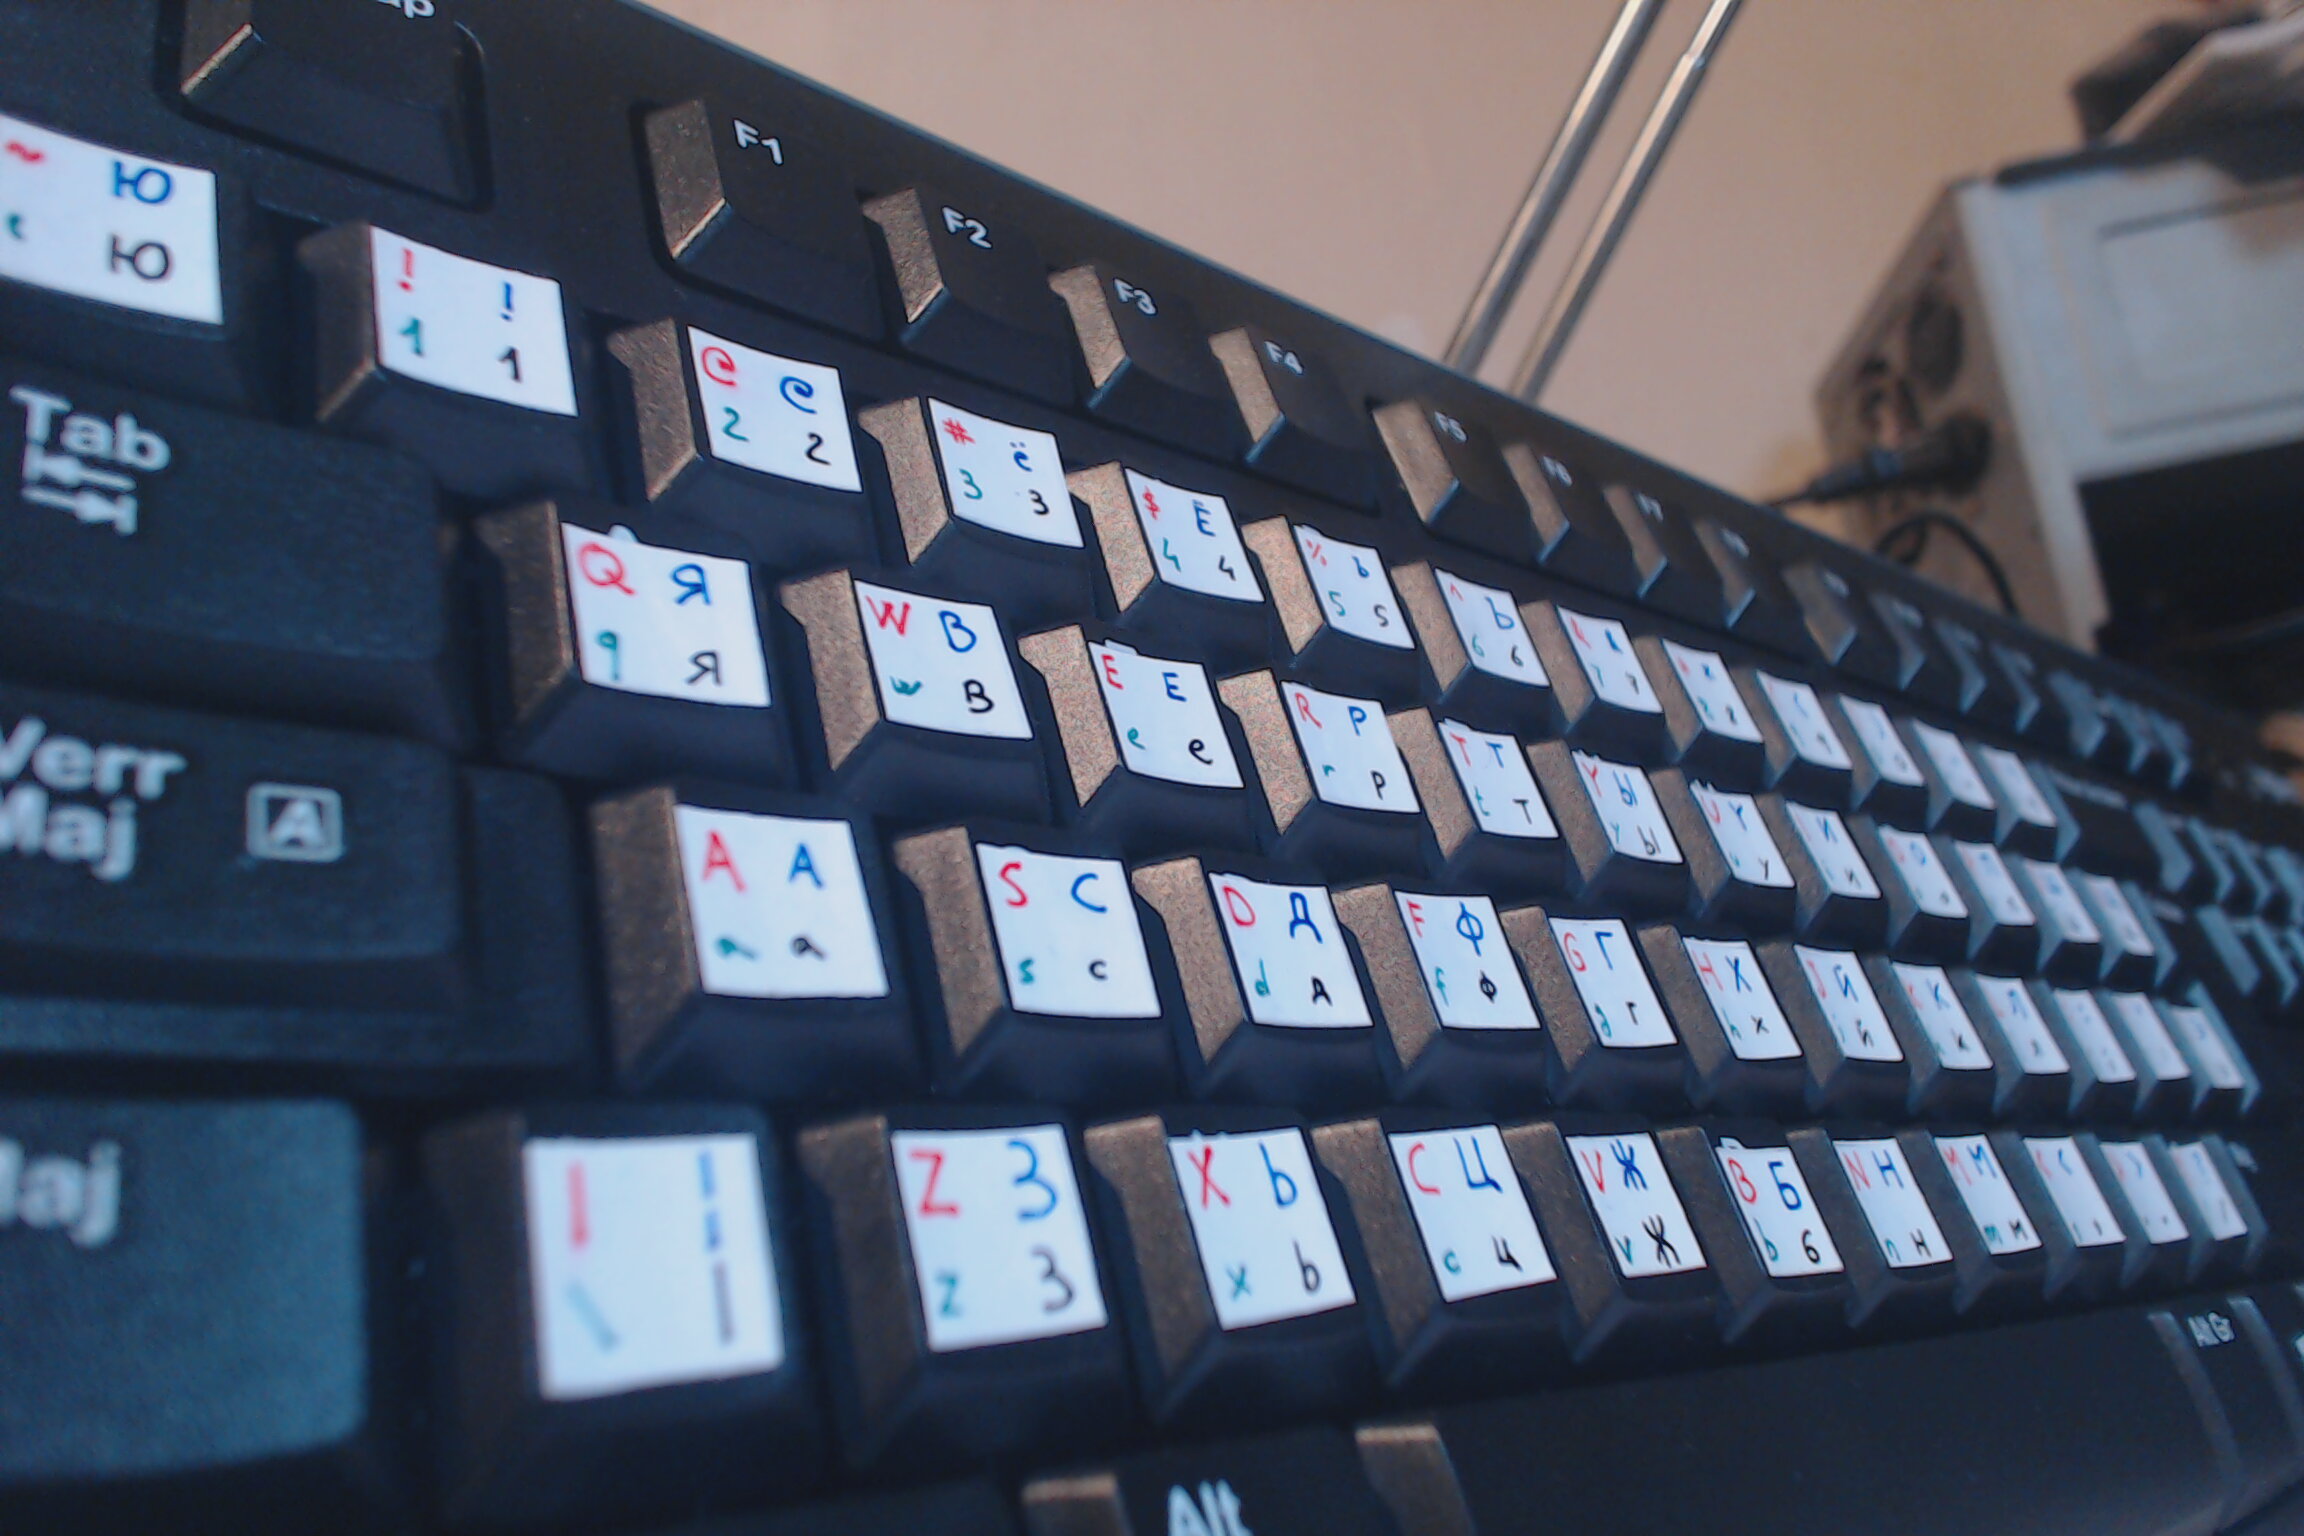 other-pictures/russian-phonetic-keyboard-stickers--detail-from-left